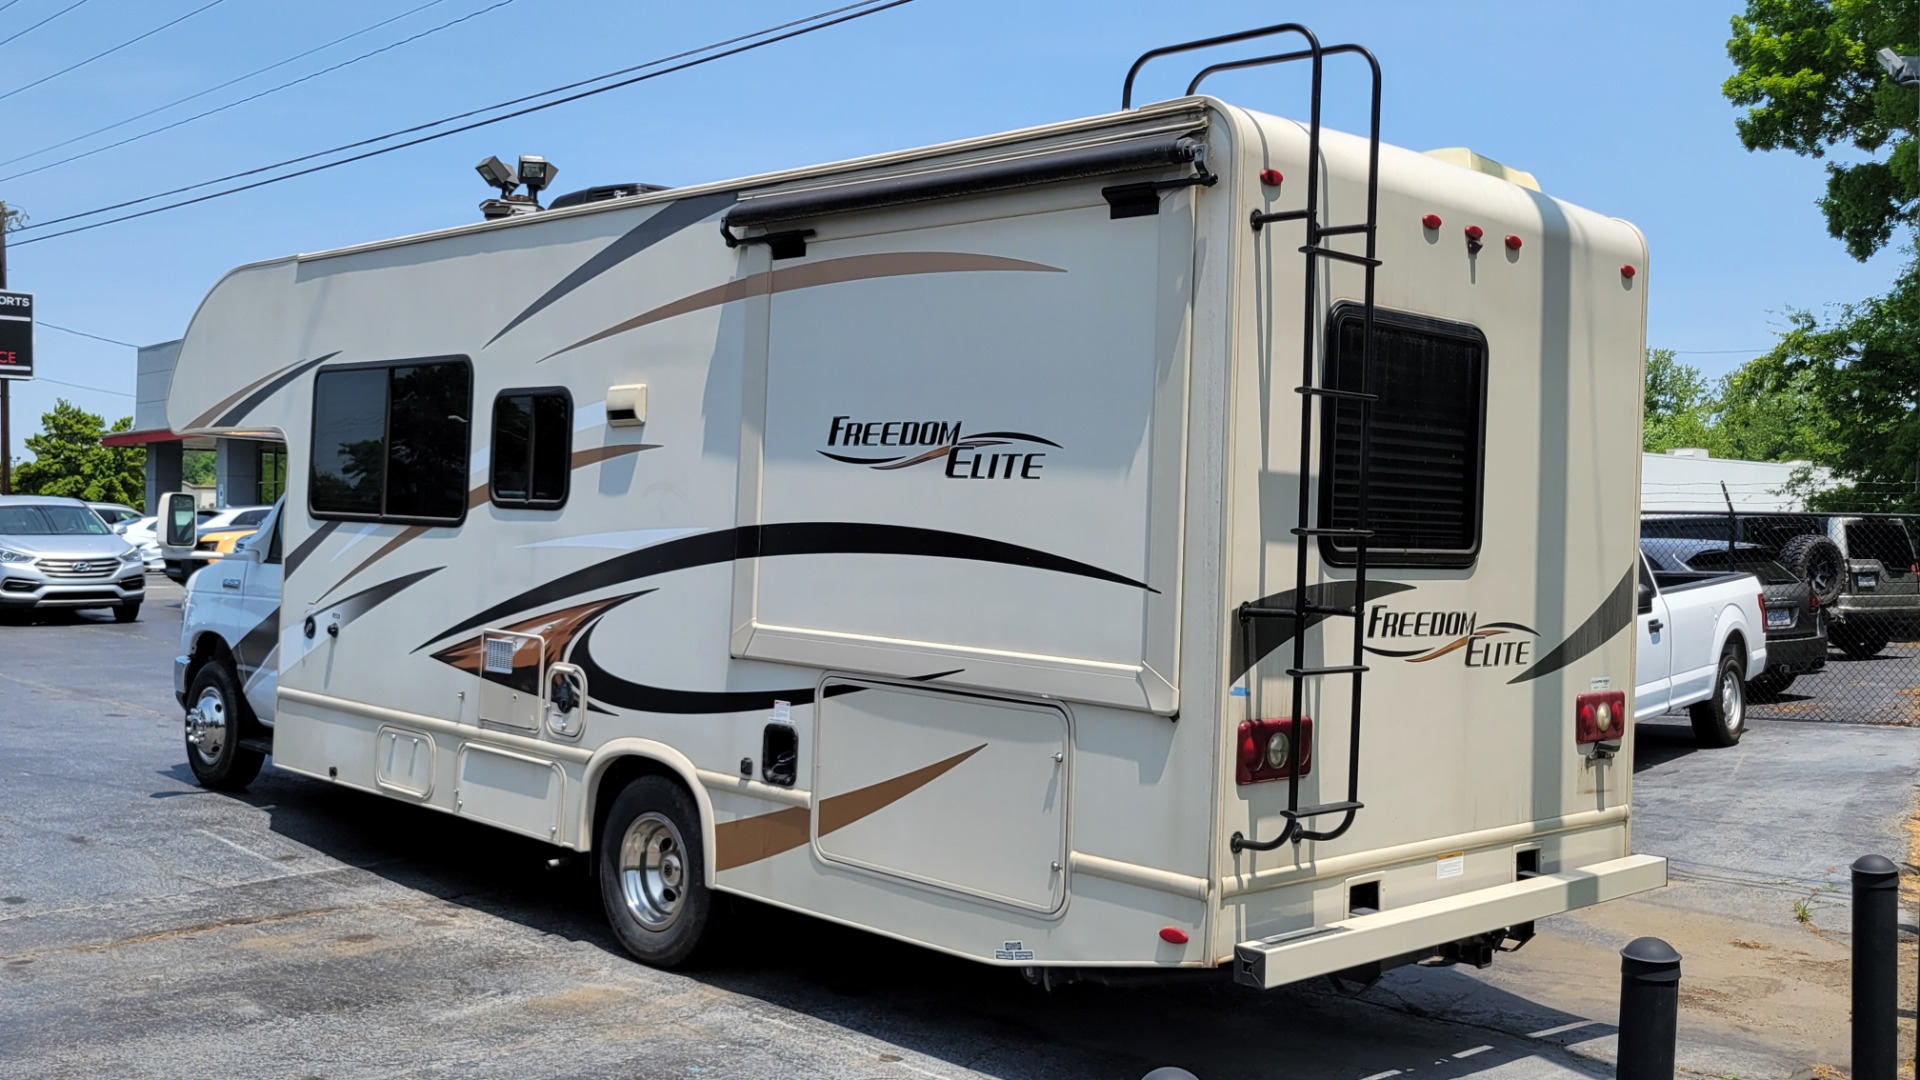 Used 2017 Ford E-SERIES CUTAWAY E-450 26H FREEDOM ELITE MOTORHOME / 6.8L V10 / ROOF LADDER for sale $67,500 at Formula Imports in Charlotte NC 28227 5